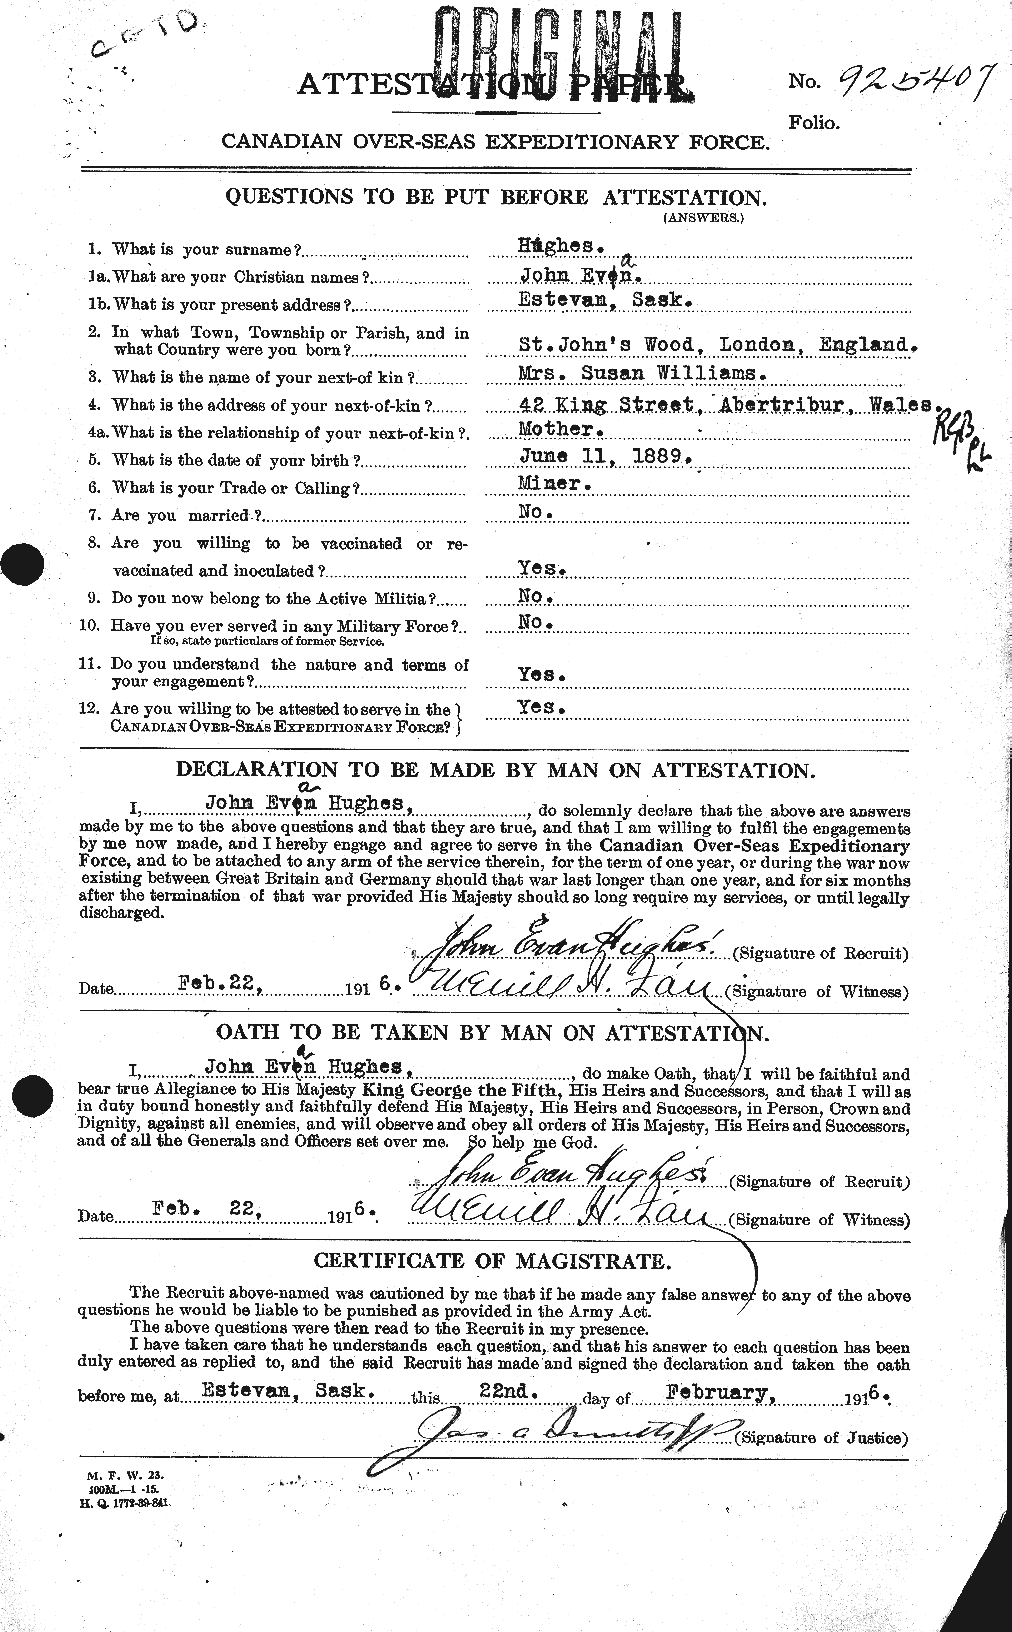 Personnel Records of the First World War - CEF 404015a